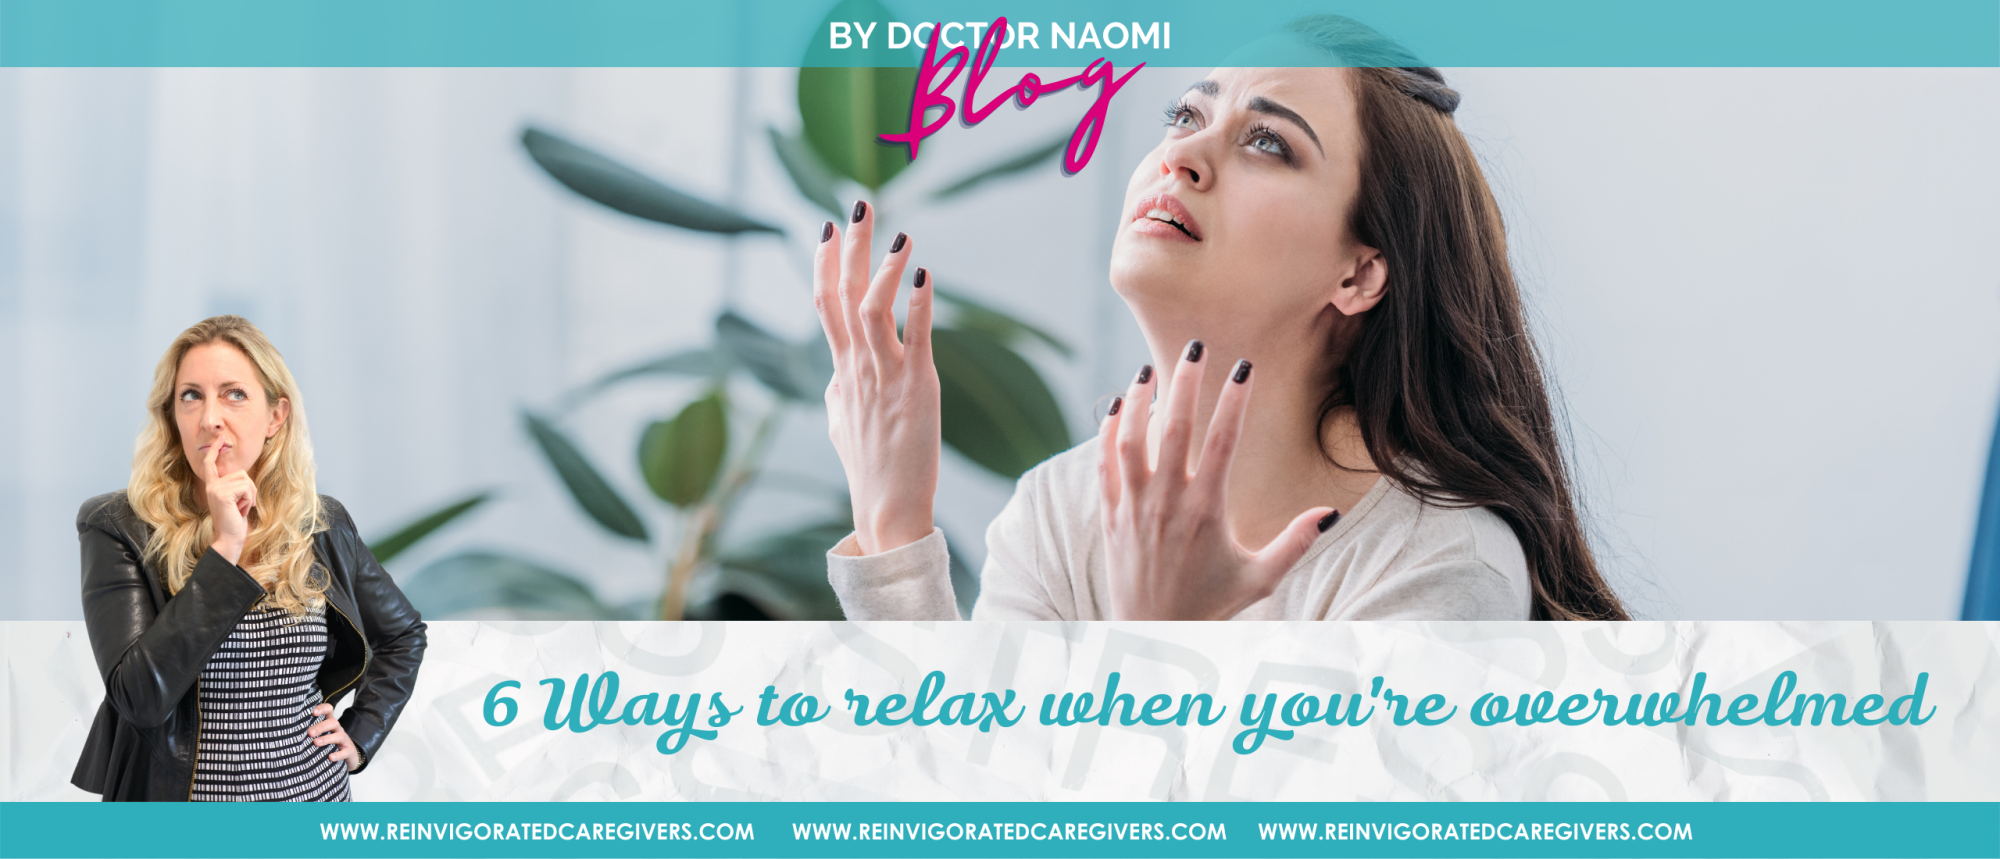 Blog 6 ways to relax when you're overwhelmed